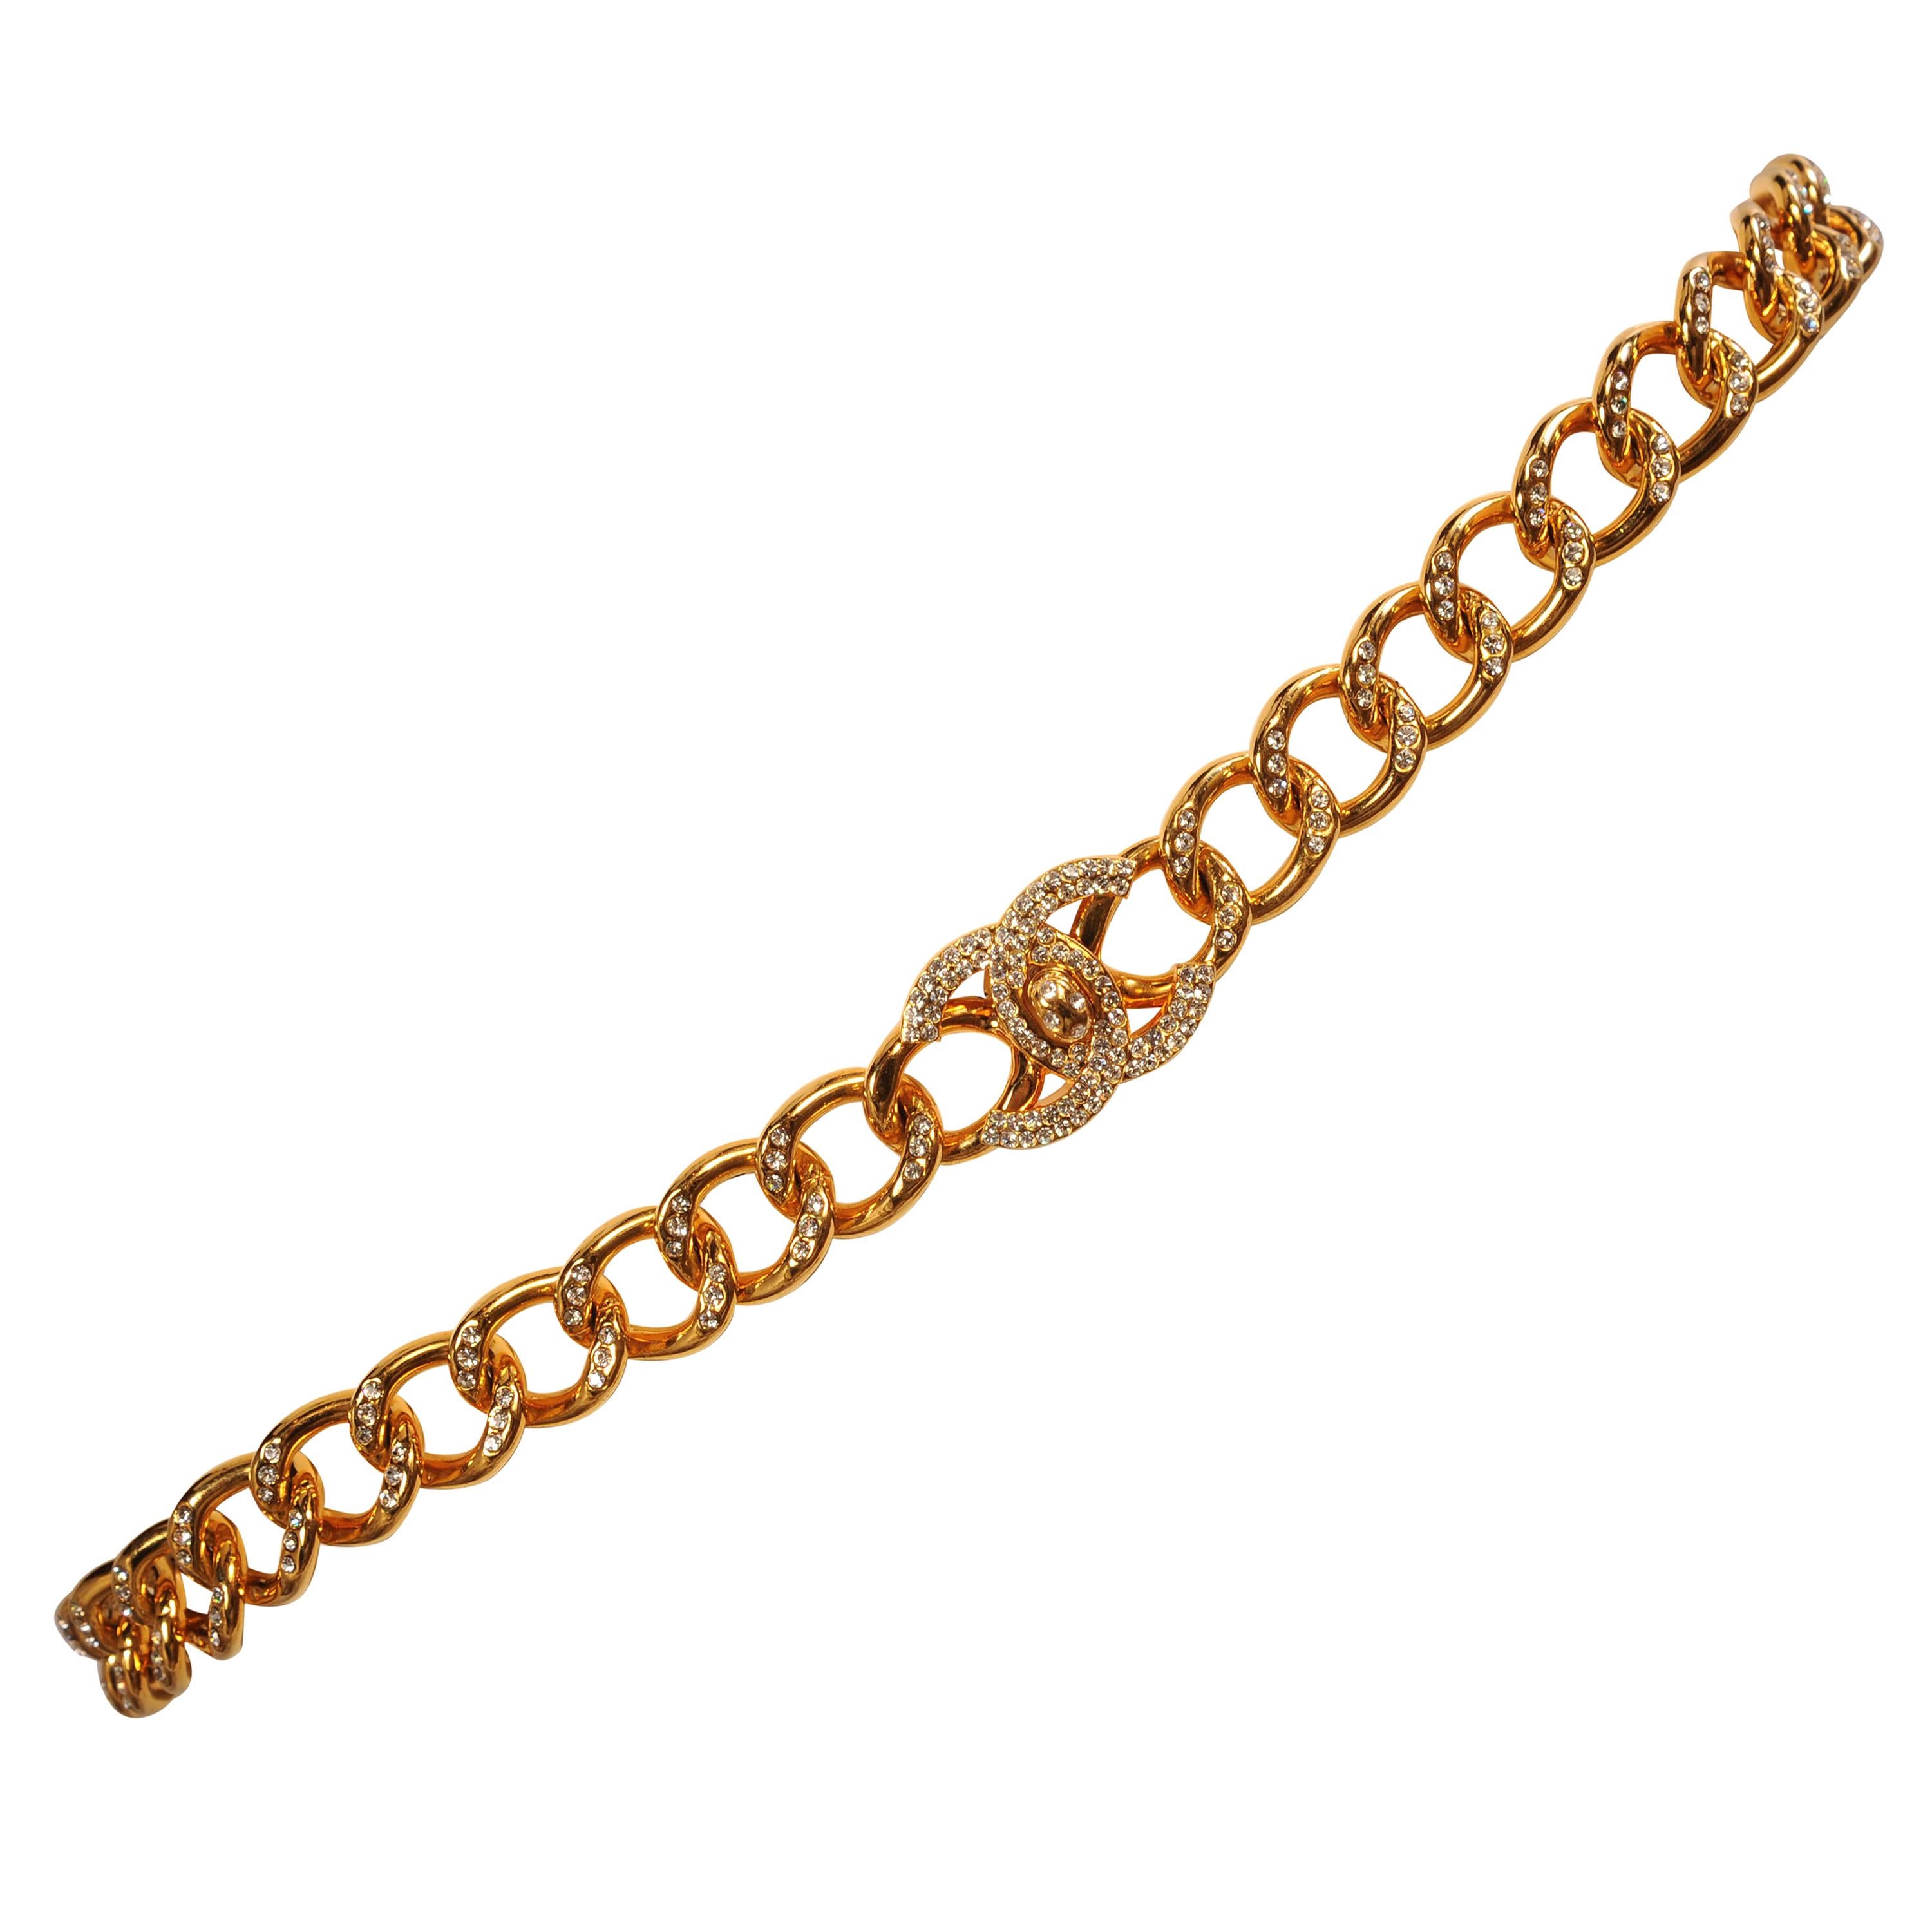 Pristine, with the original box and hang tag, this stunning Chanel belt appears to have never been worn. Each of the links is studded with diamond like stones as is the buckle and turnlock clasp. It works equally well as a necklace and it is in